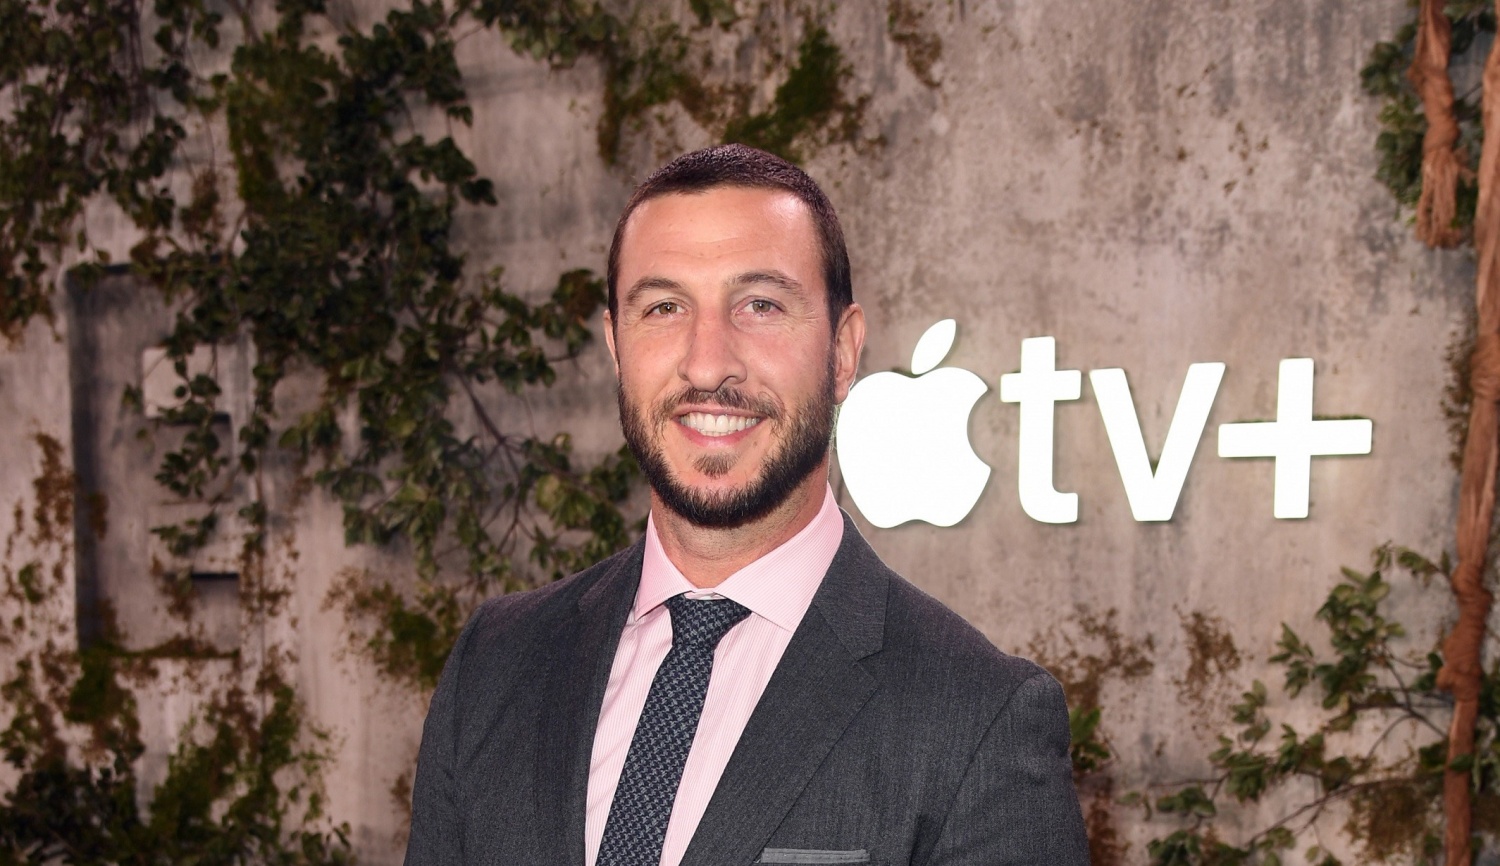 Pablo Schreiber attends the world premiere of Apple TV+'s "See" at Fox Village Theater on October 21, 2019 in Los Angeles, California.